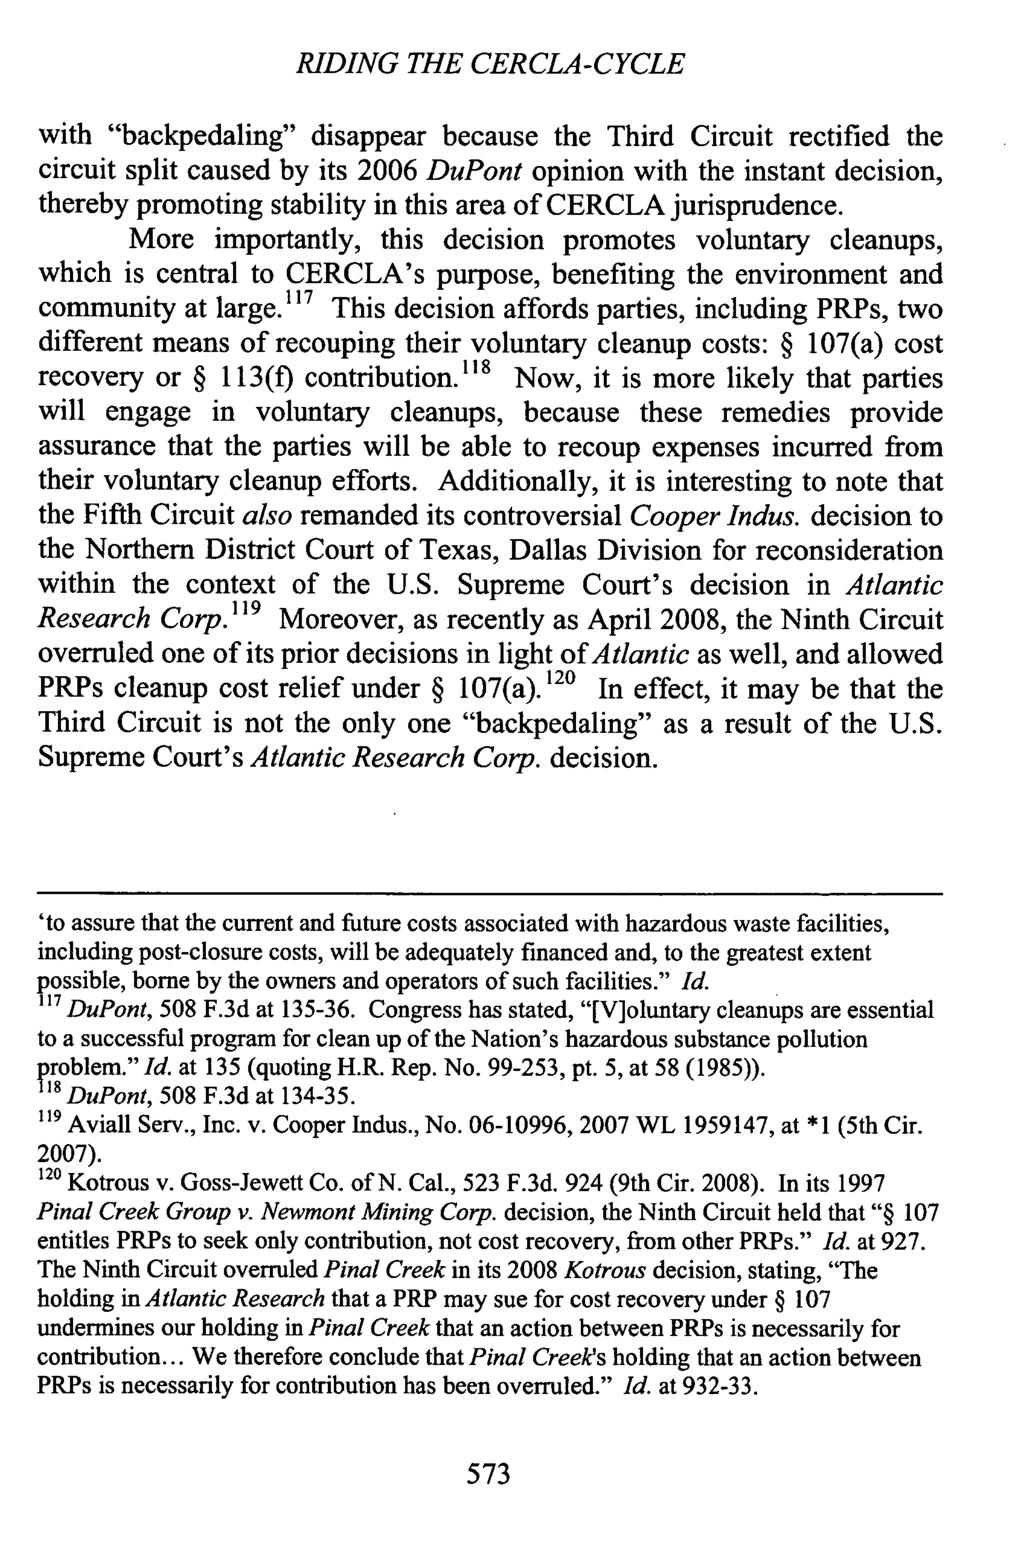 RIDING THE CERCLA-CYCLE with "backpedaling" disappear because the Third Circuit rectified the circuit split caused by its 2006 DuPont opinion with the instant decision, thereby promoting stability in